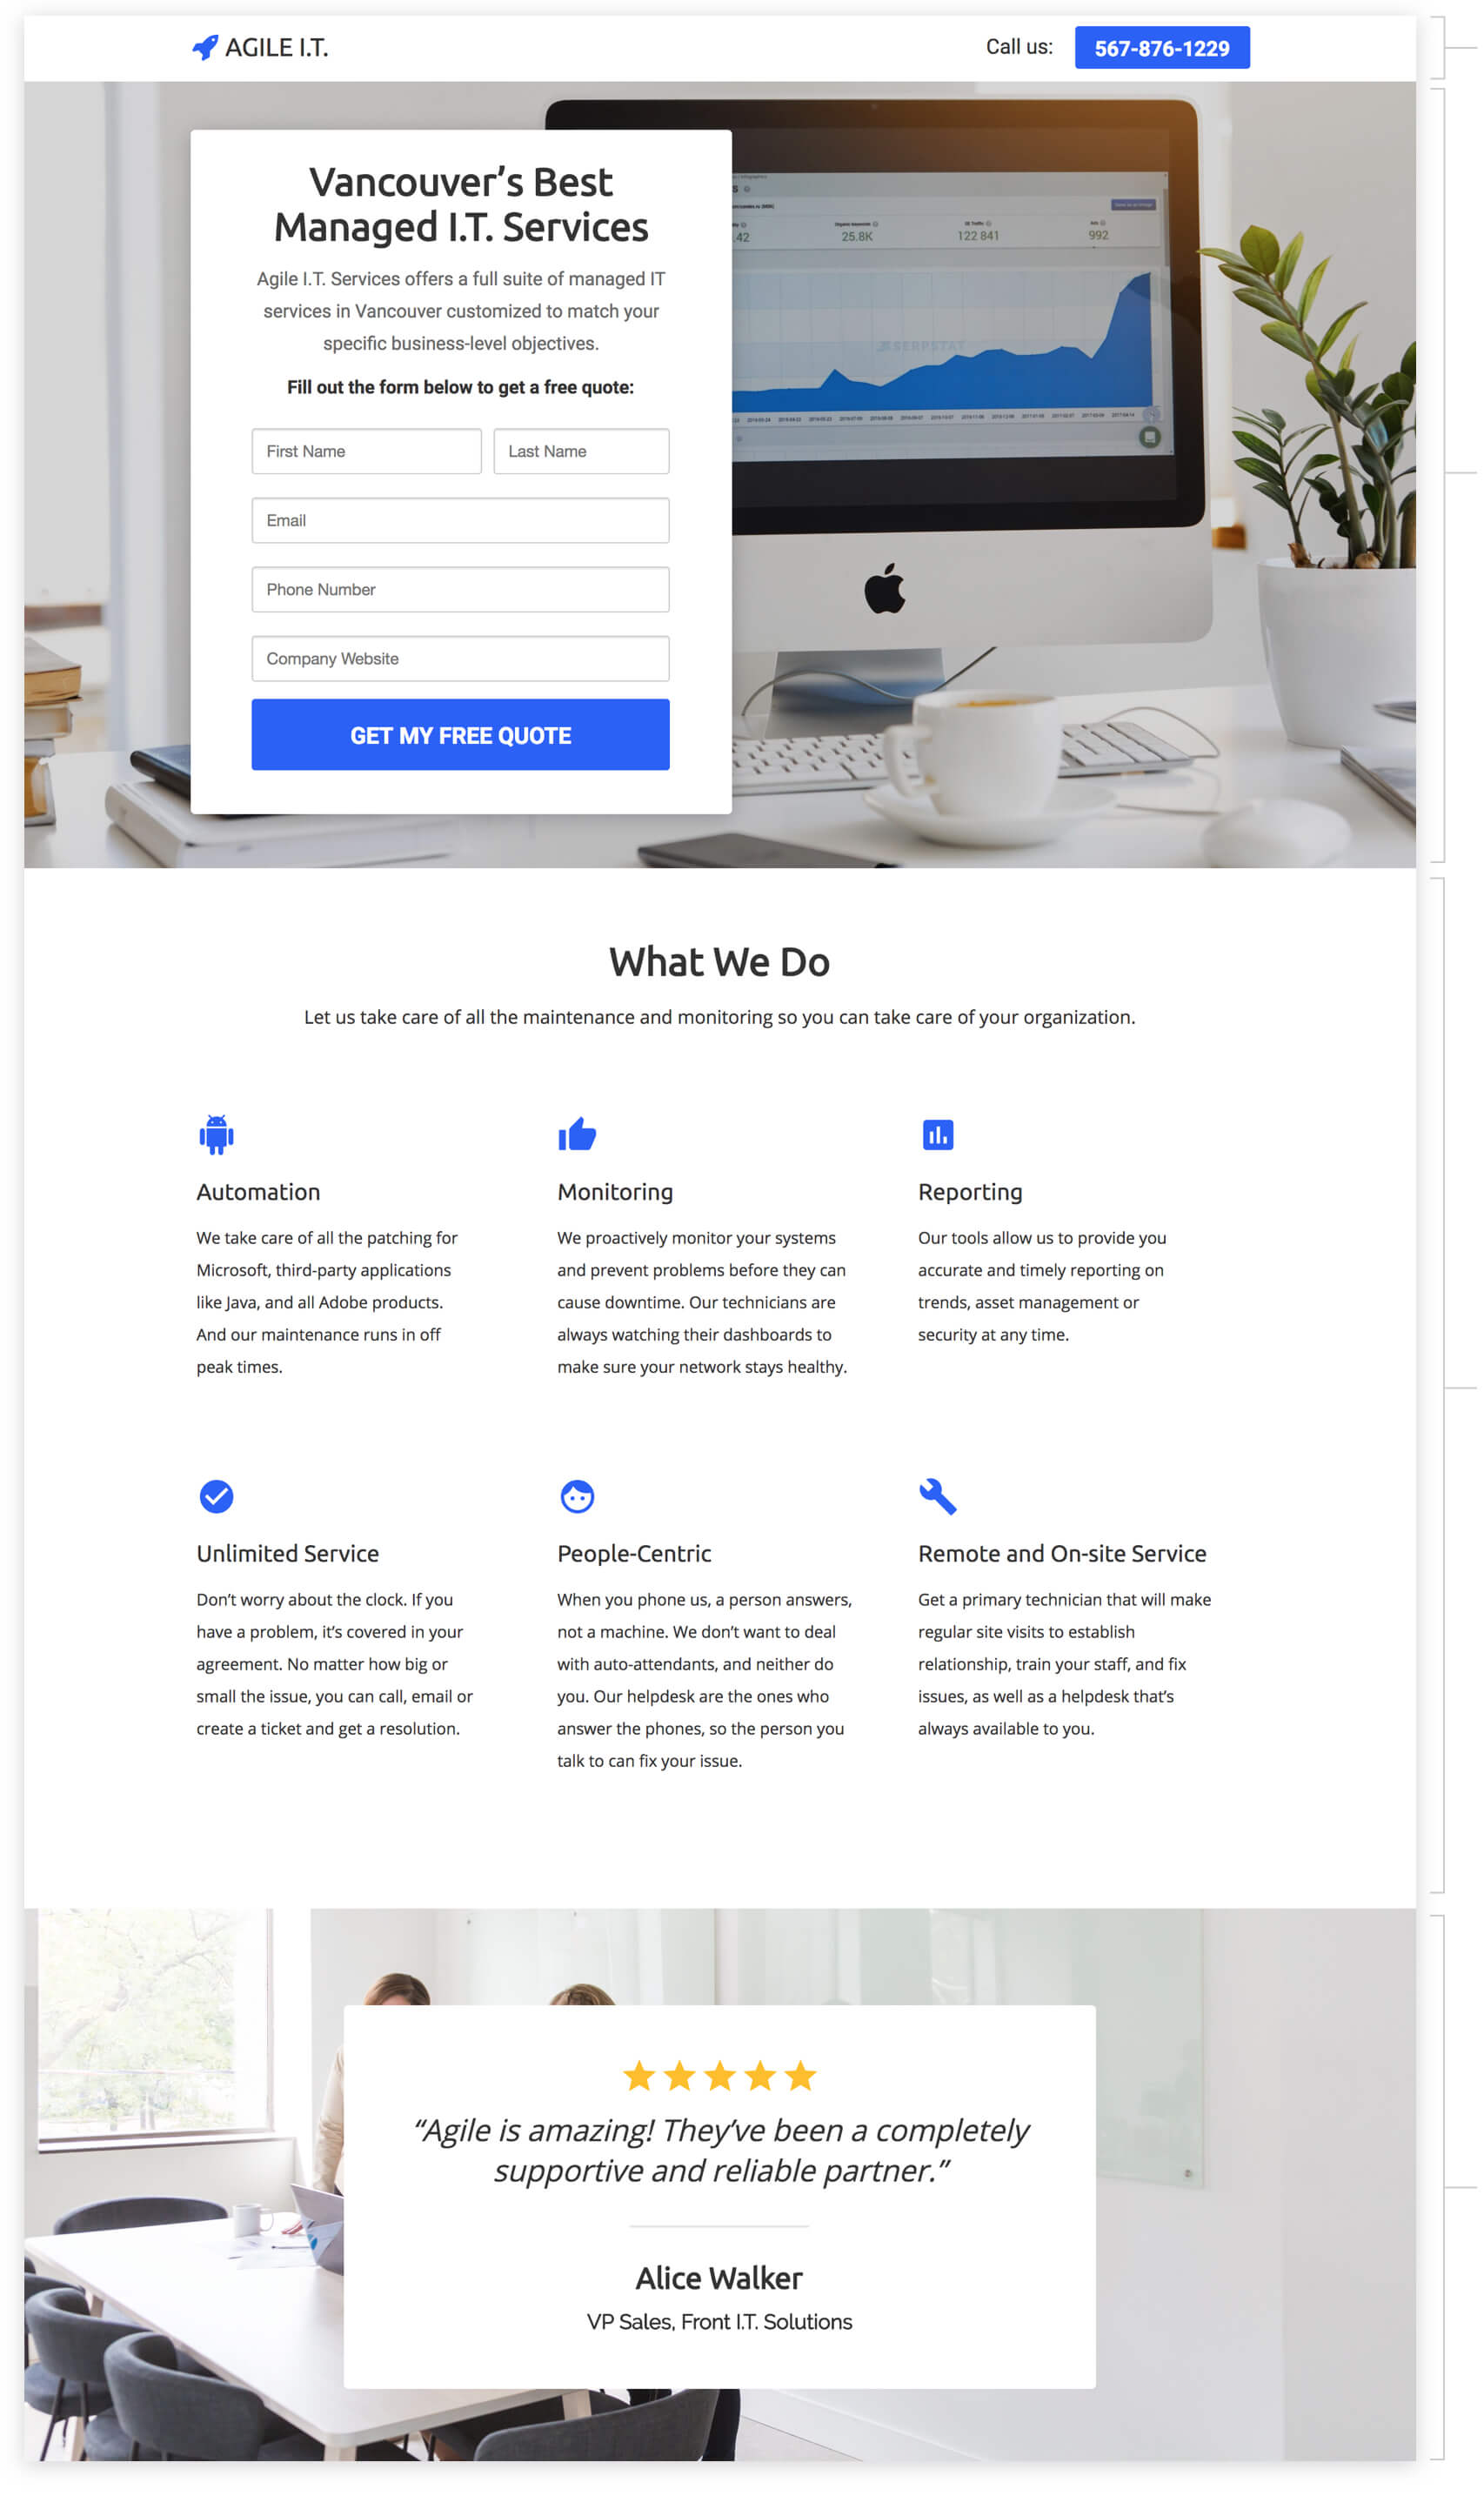 Sign Up for a Free Quote landing page